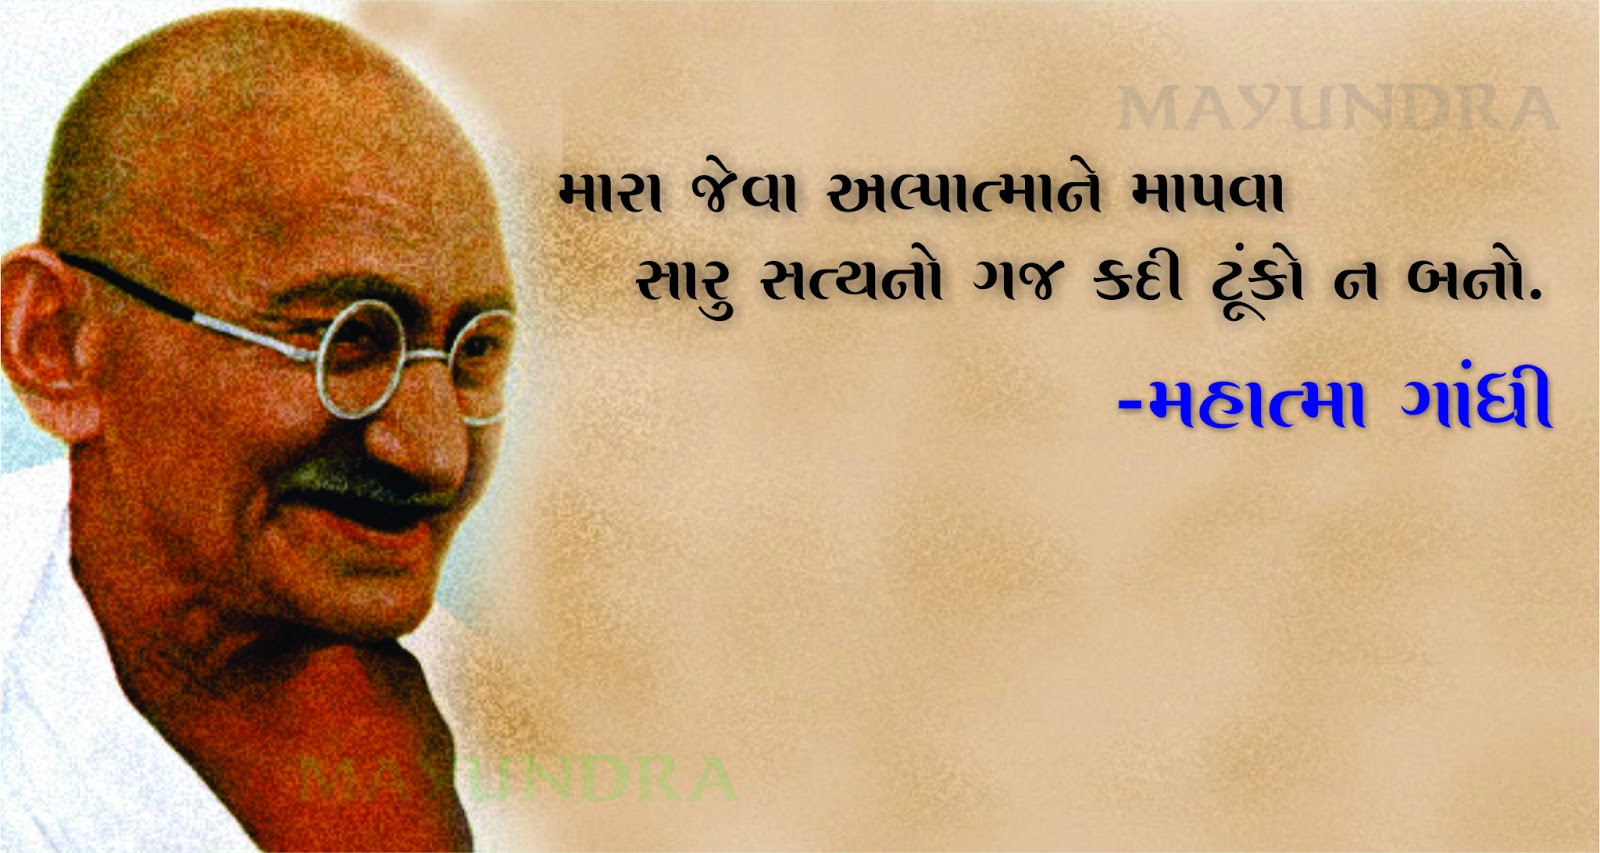 Posted 1st October 2012 by Quotes India